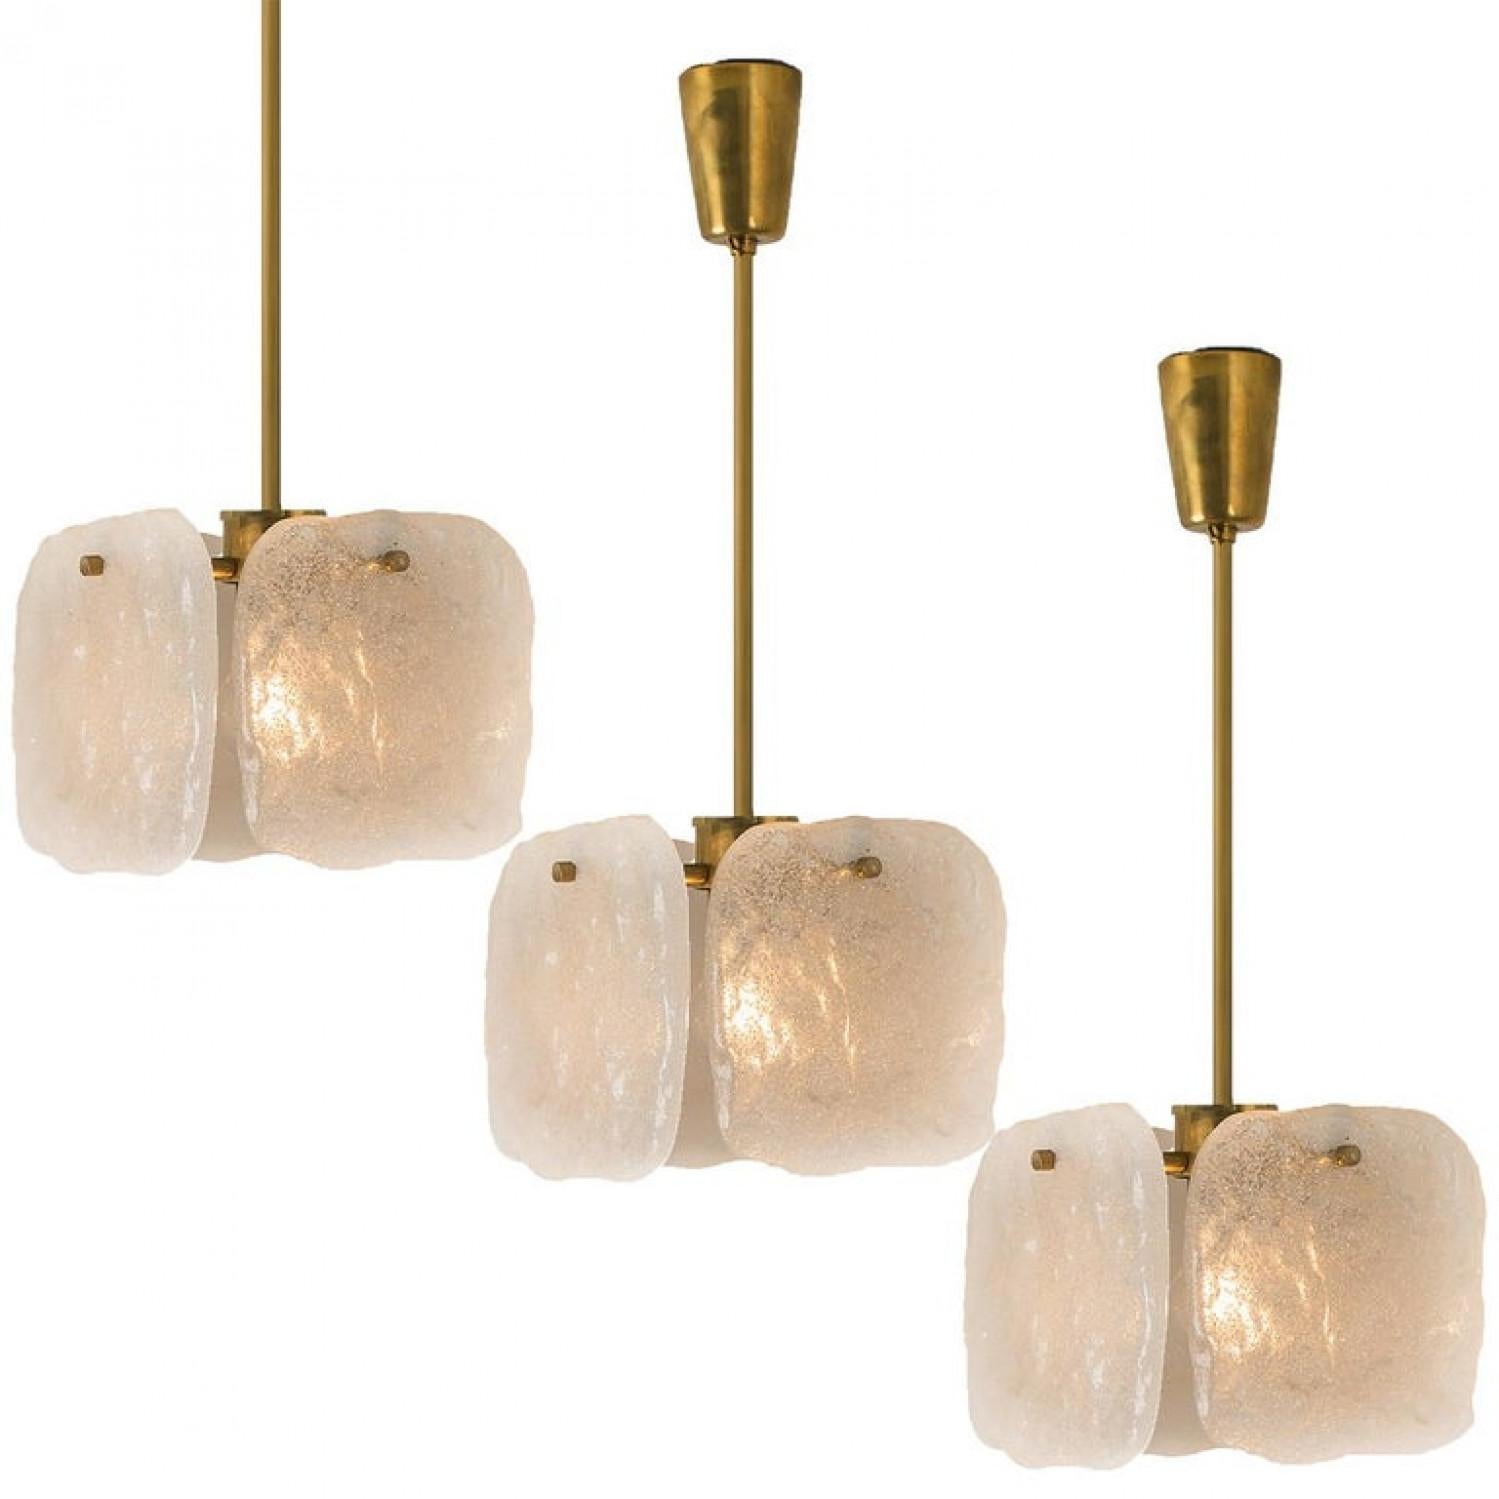 Pair of Glass and Brass Light Fixtures Designed by J.T Kalmar, Austria, 1960s For Sale 2